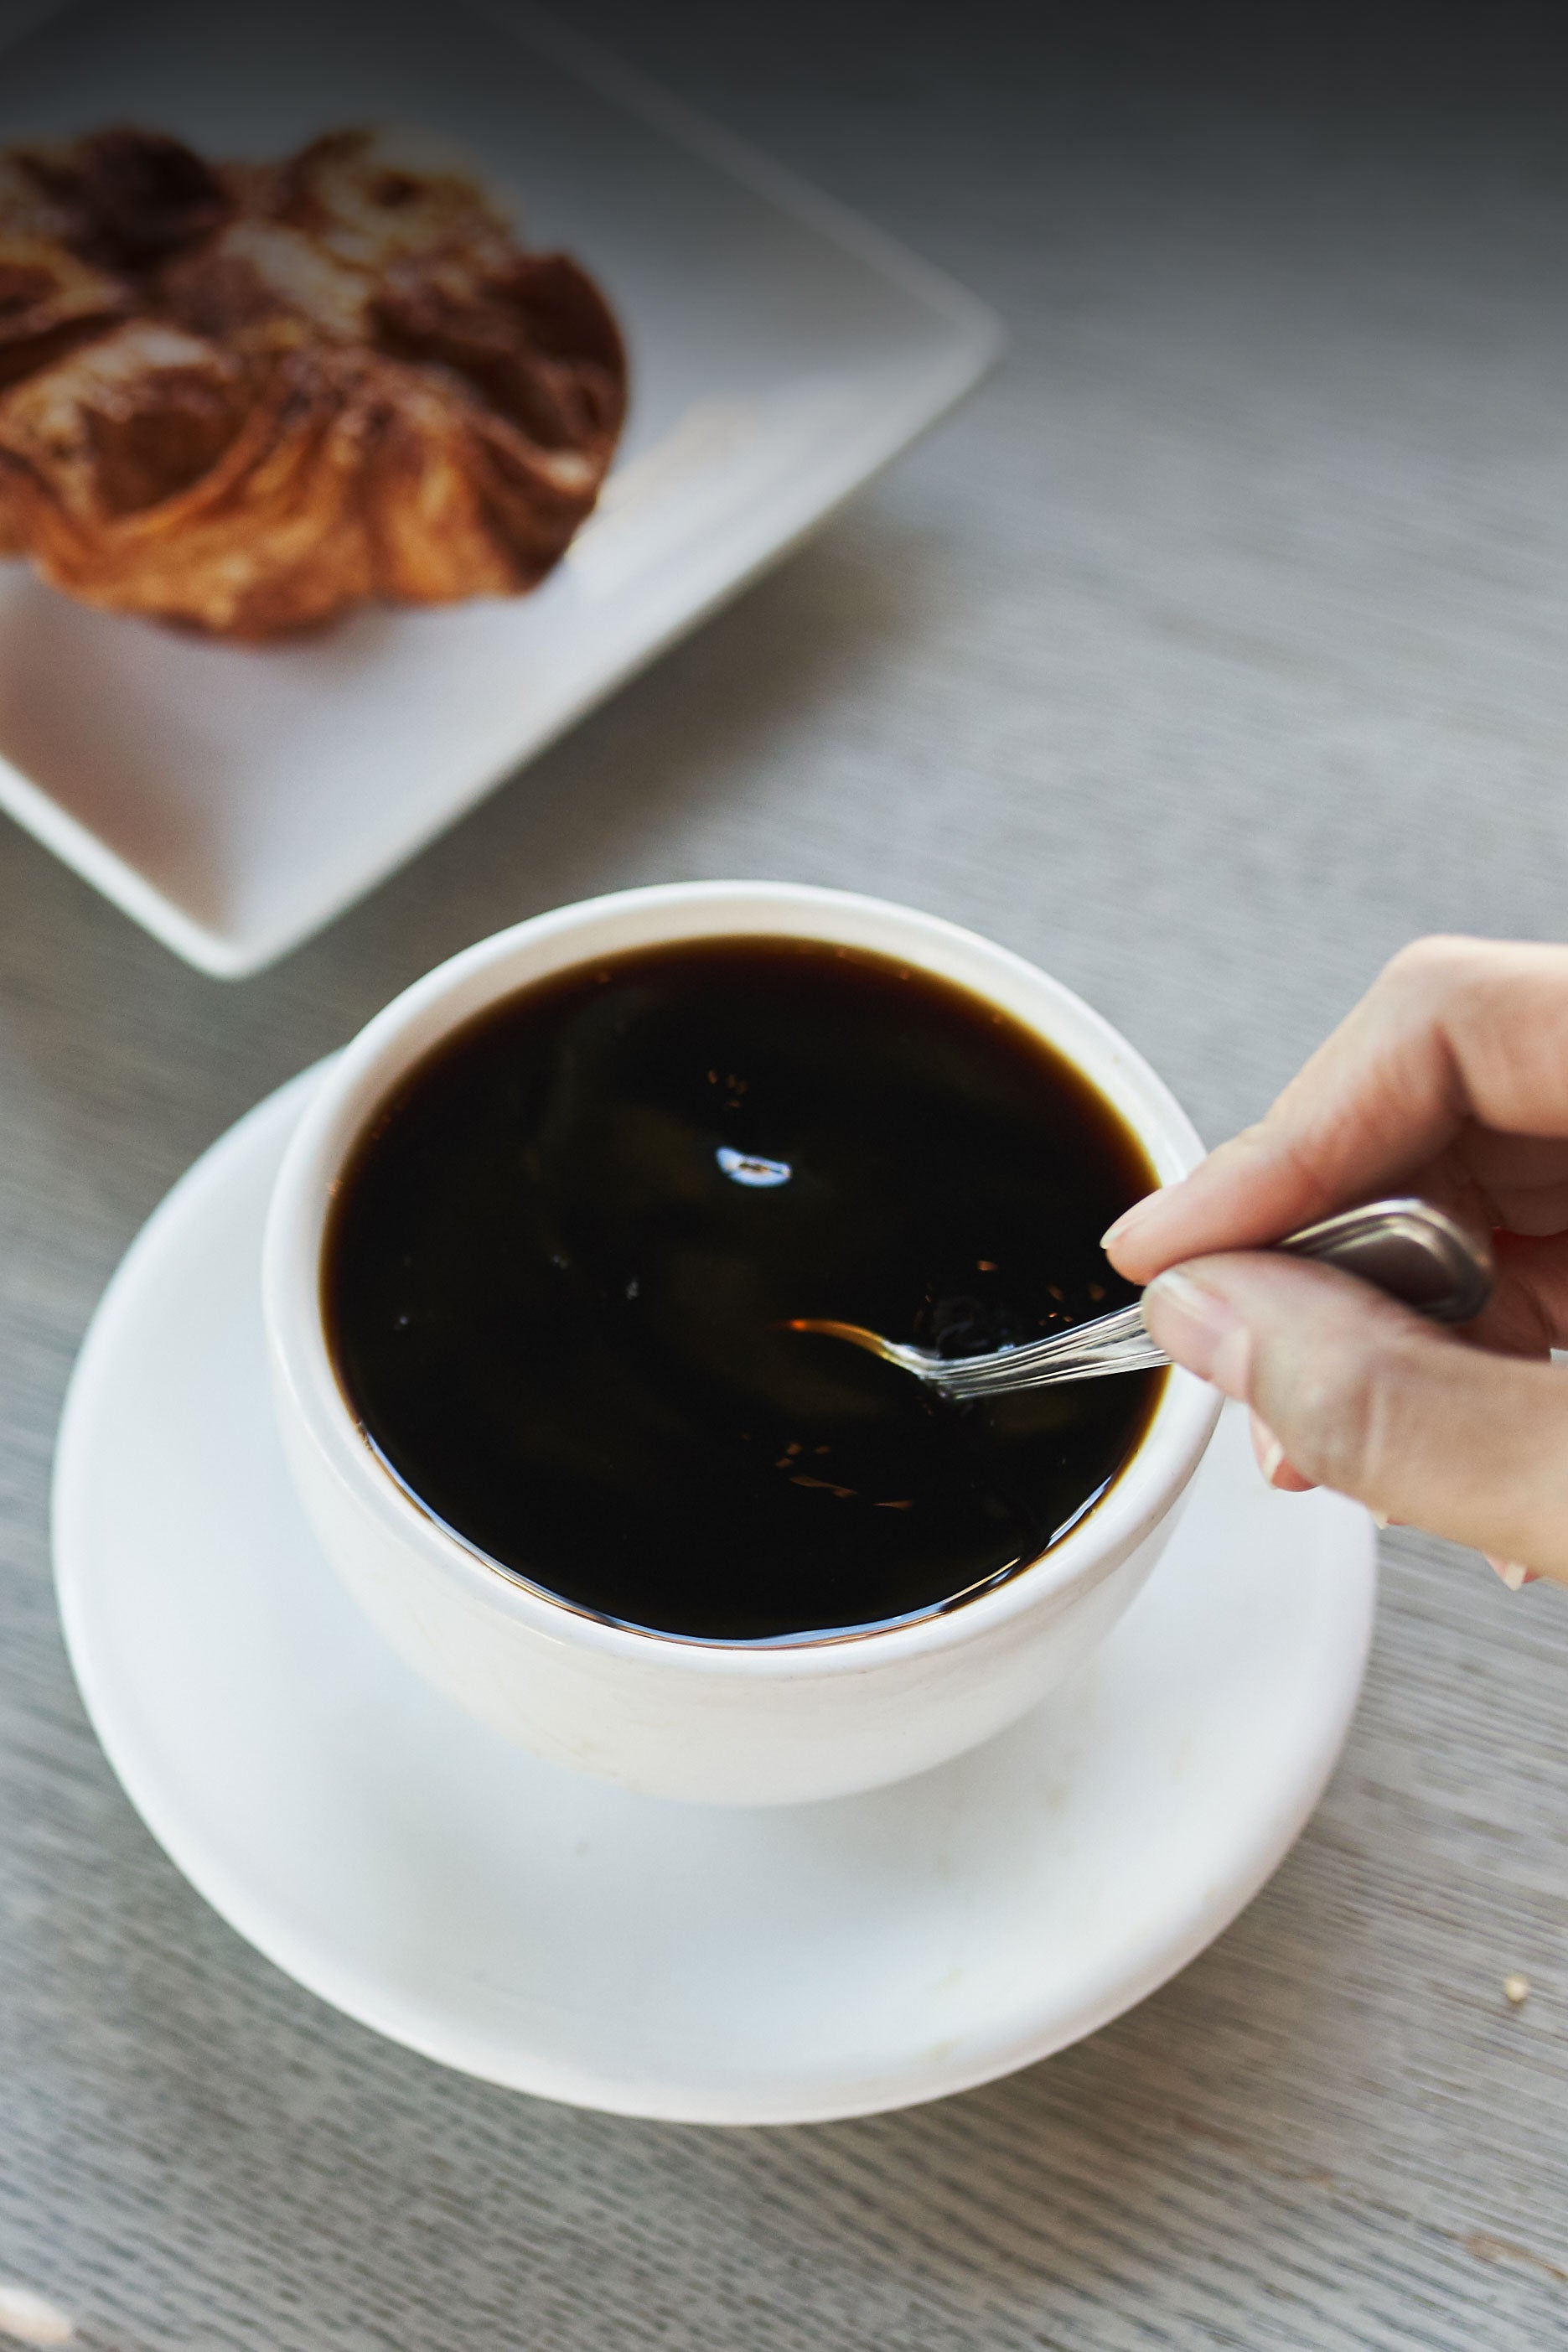 a cup of black coffee being stirred by a hand with a pastry in the frame